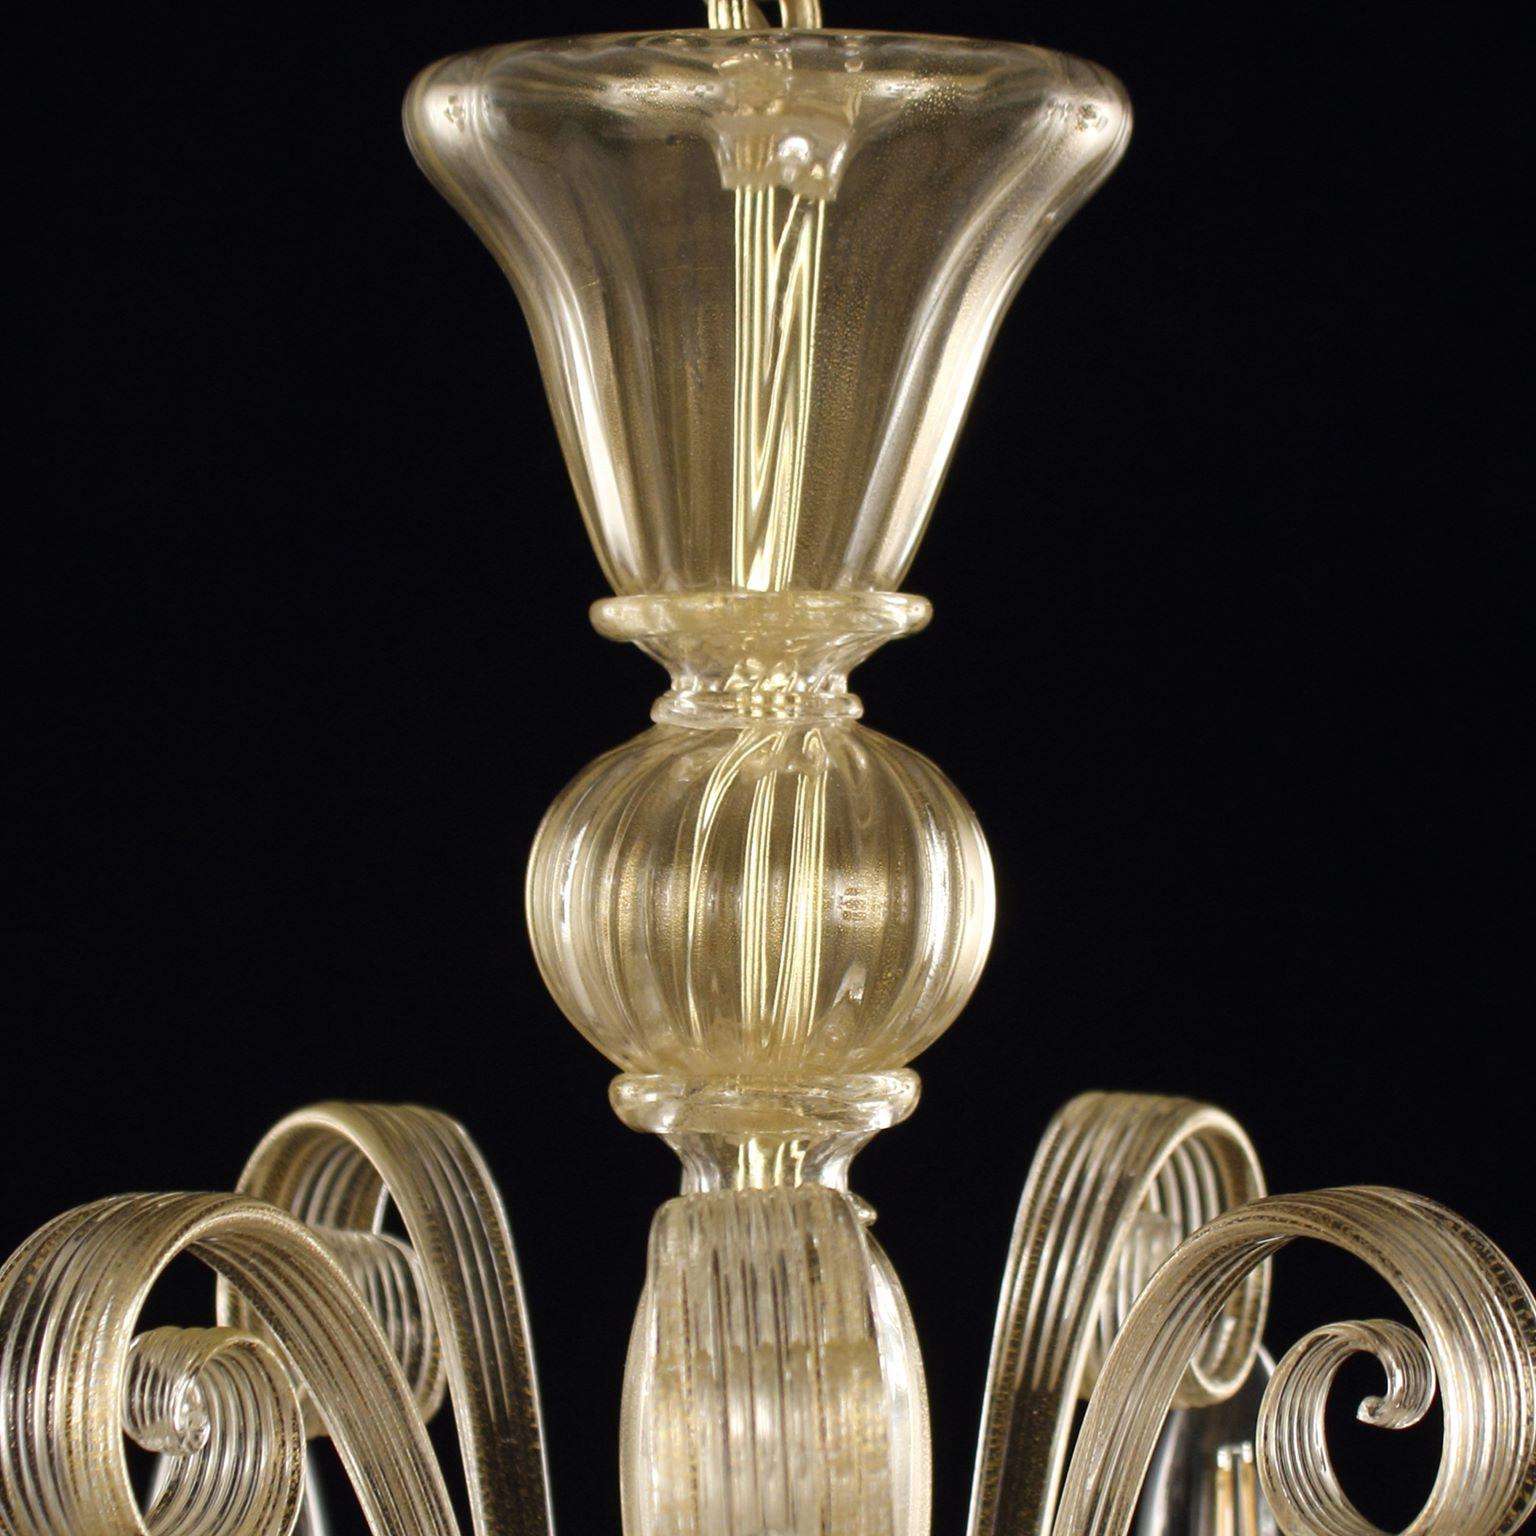 Capriccio chandelier, 5 lights, golden leaf artistic glass, with curly ornamental elements by Multiforme.
Inspired by the Classic Venetian tradition it is characterised by a central column where many blown glass “pastoral” elements are installed.